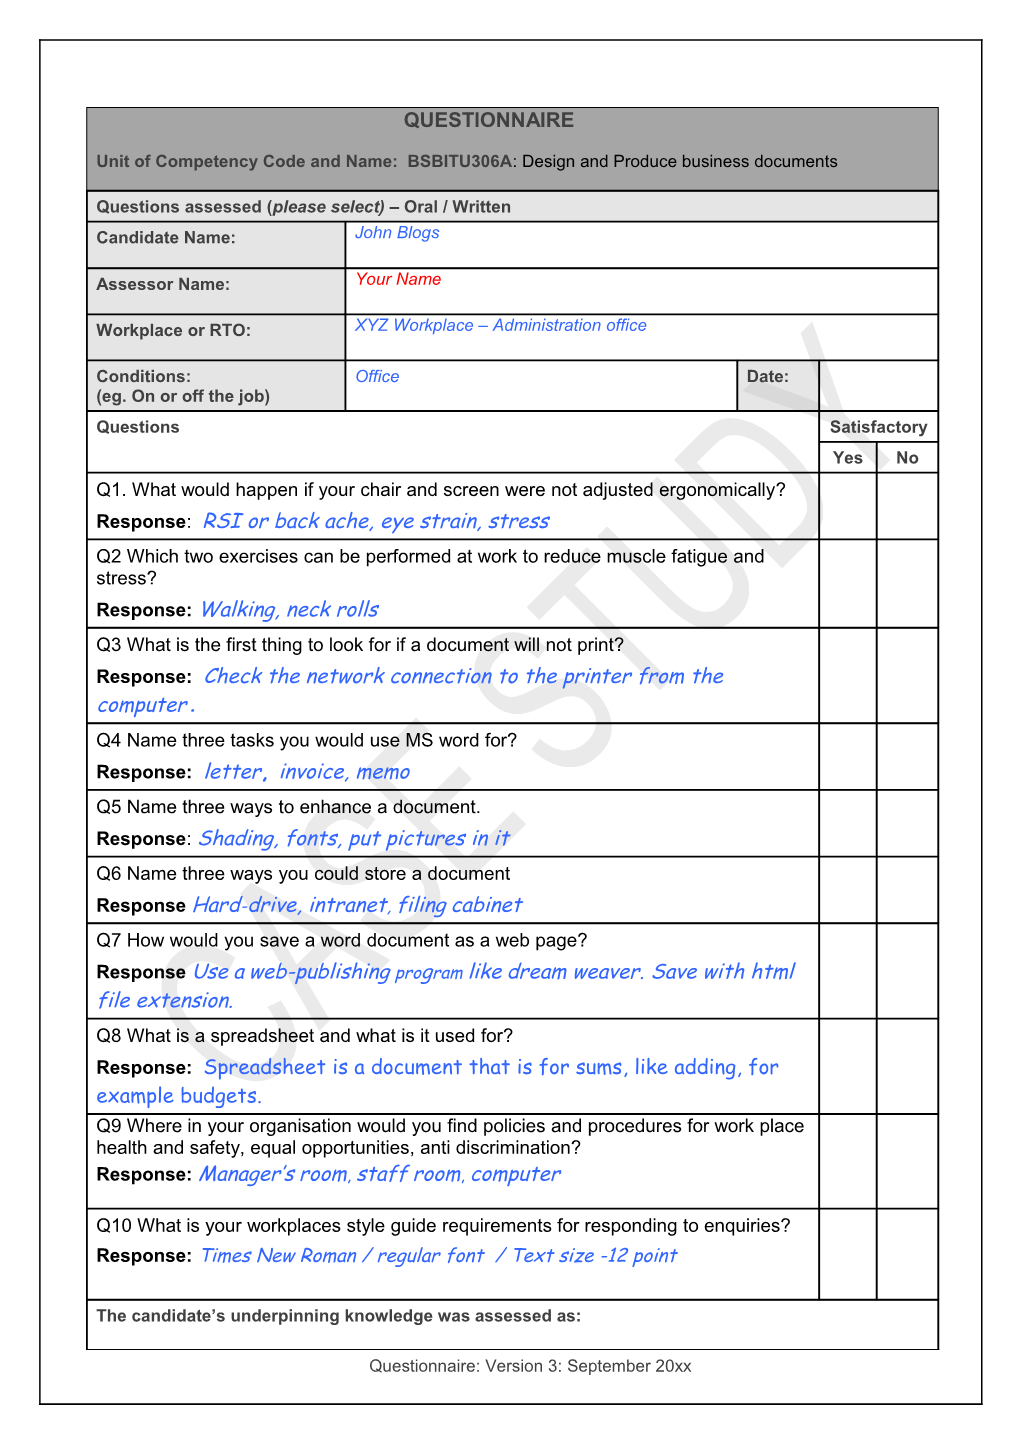 Assessment Tool Completed Example